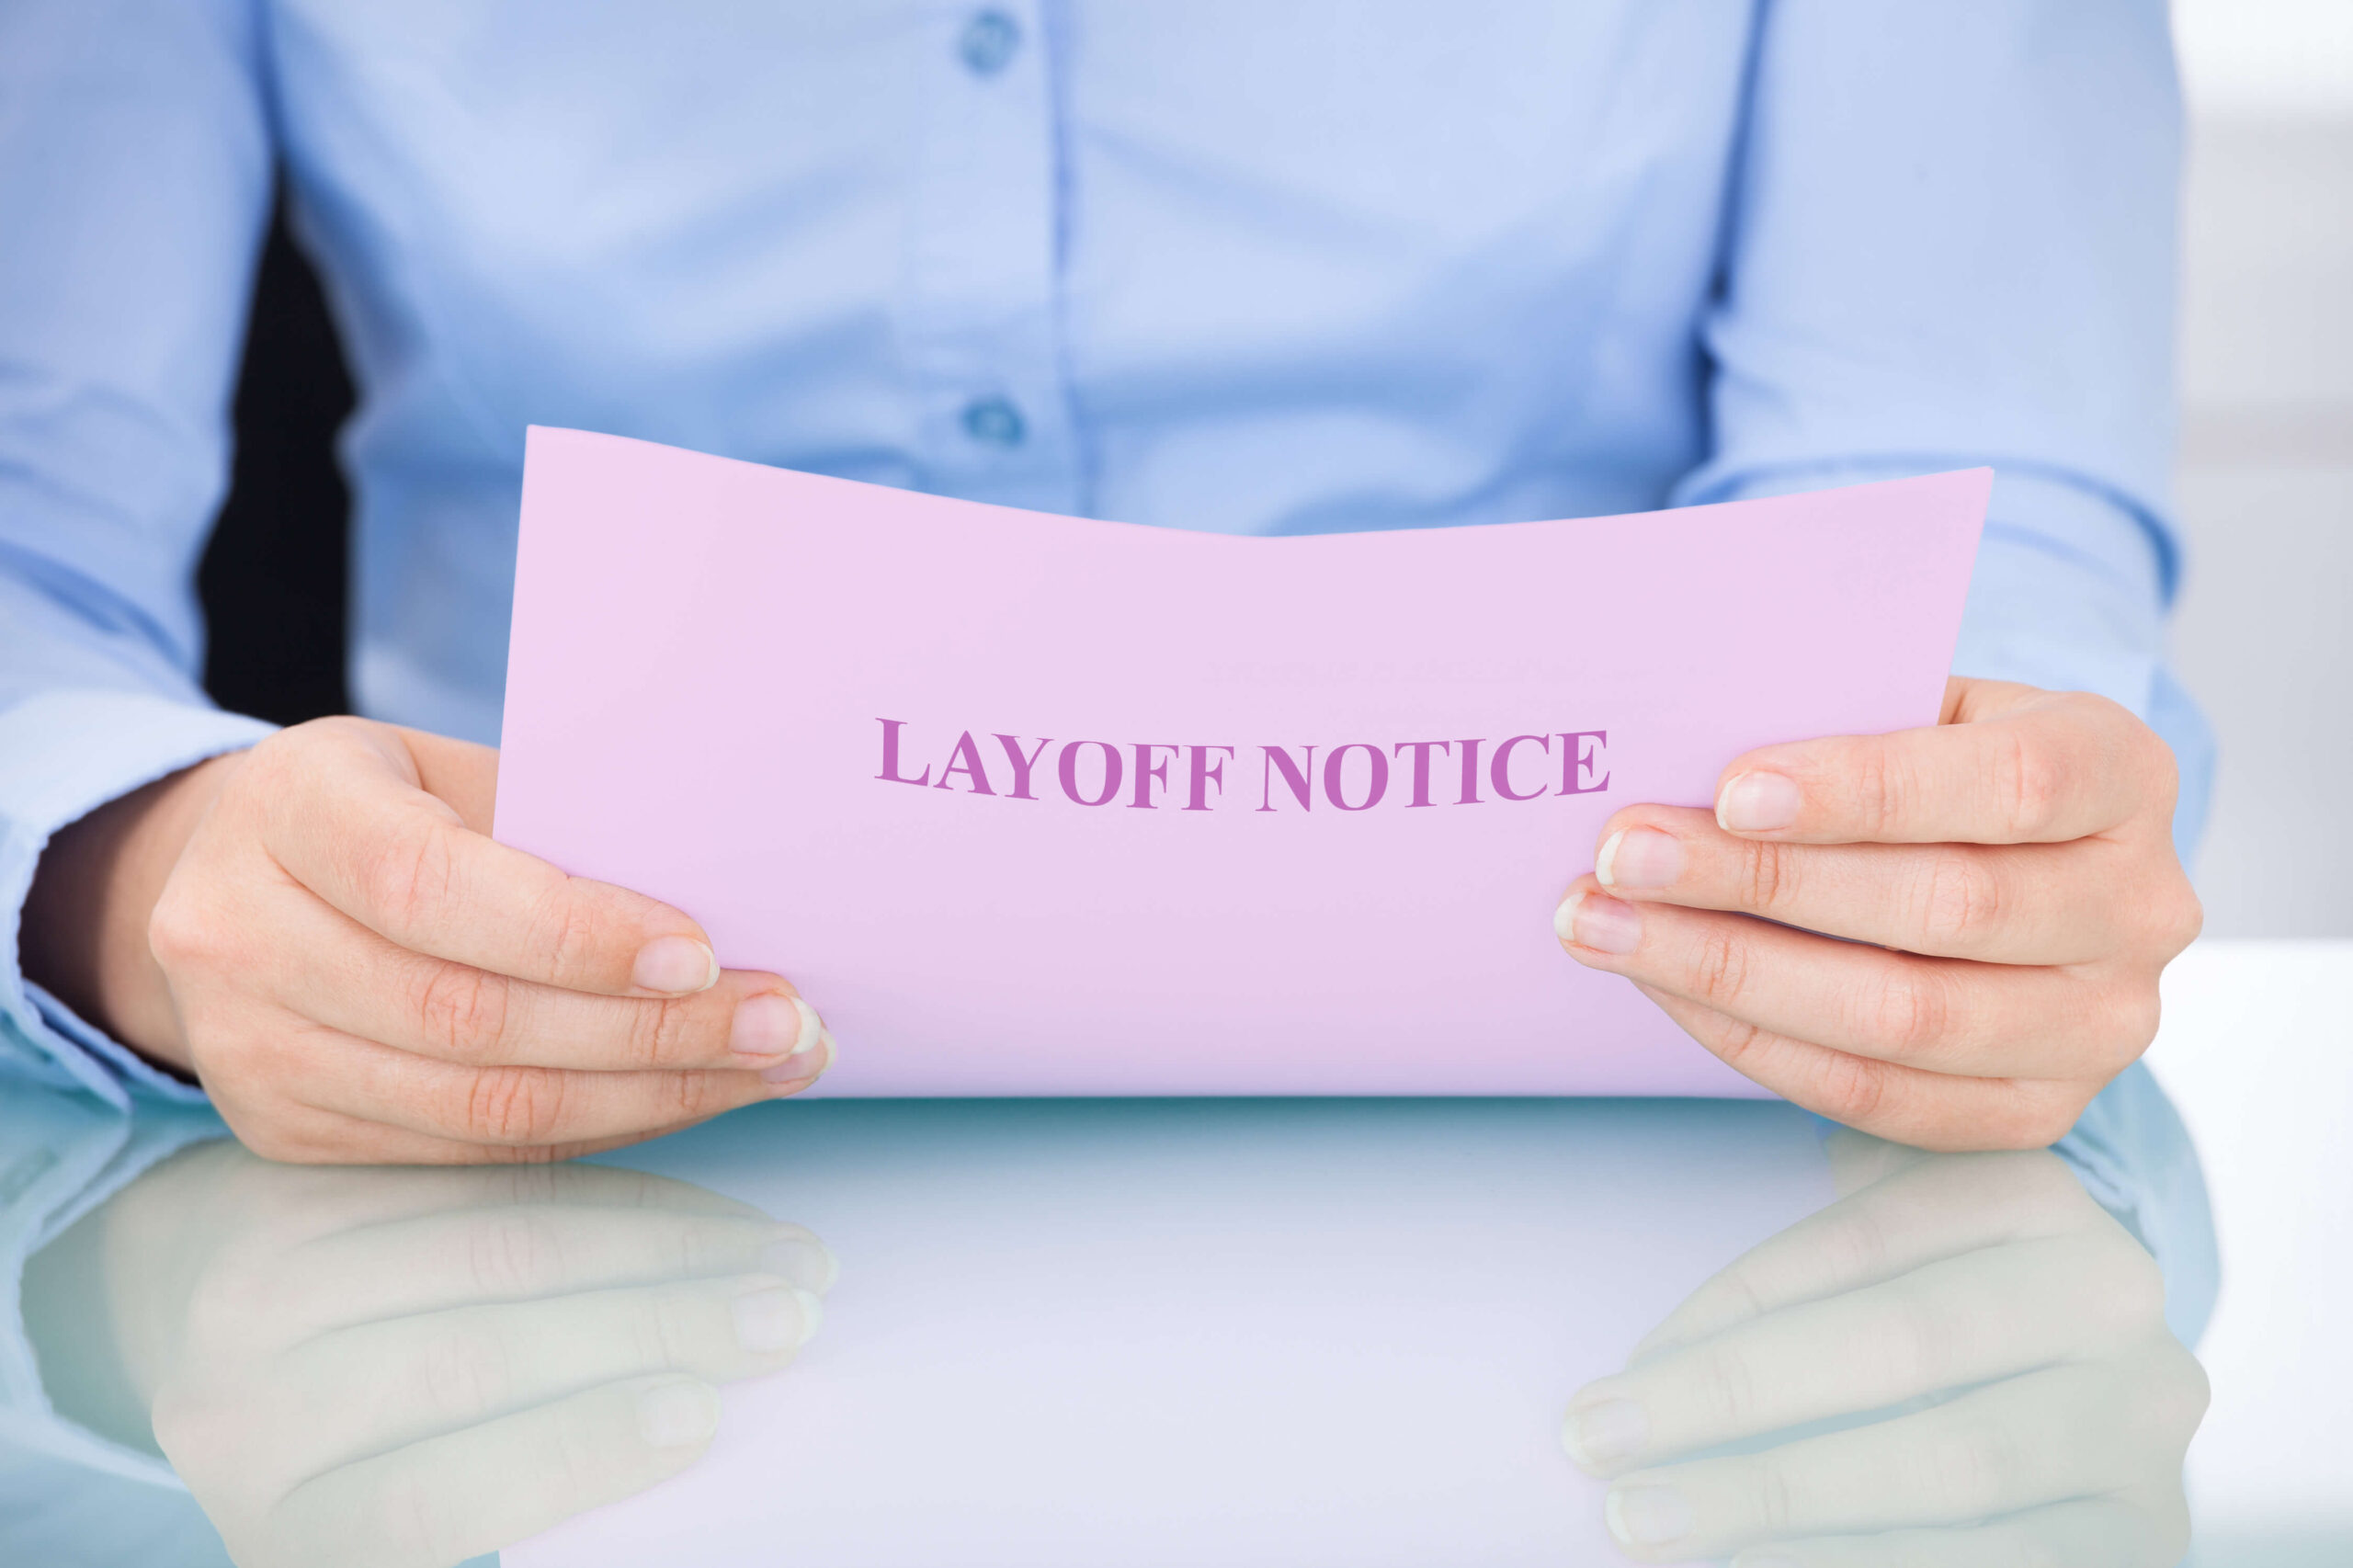 Temporary lay off - man in blue shirt holding a pink piece of paper saying layoff notice